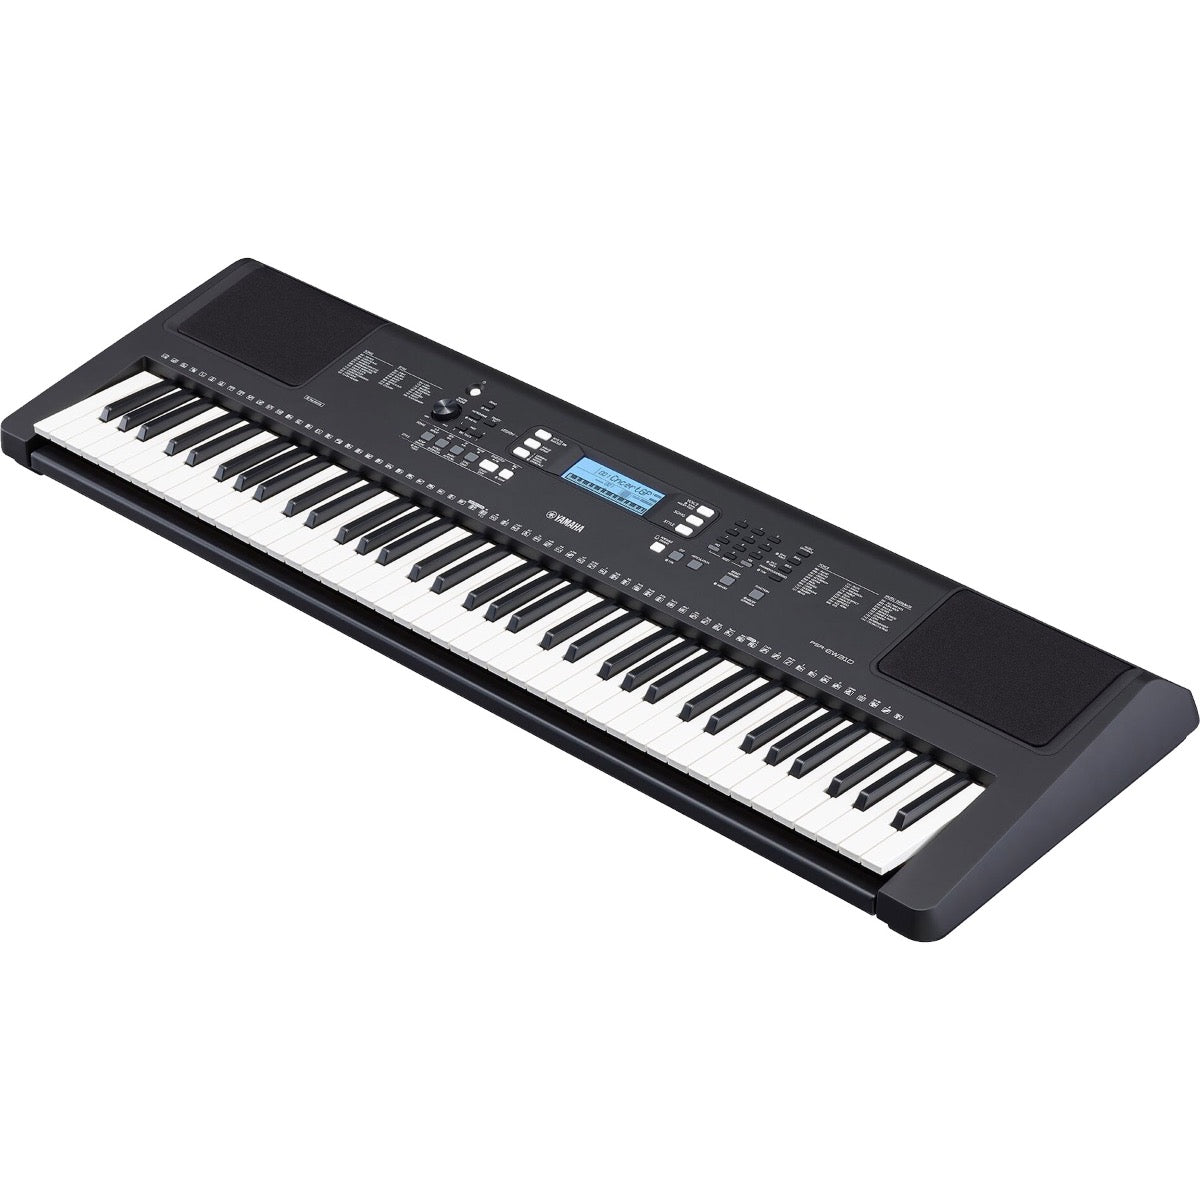 3/4 view of Yamaha PSR-EW310 Portable Keyboard showing top, front and right side